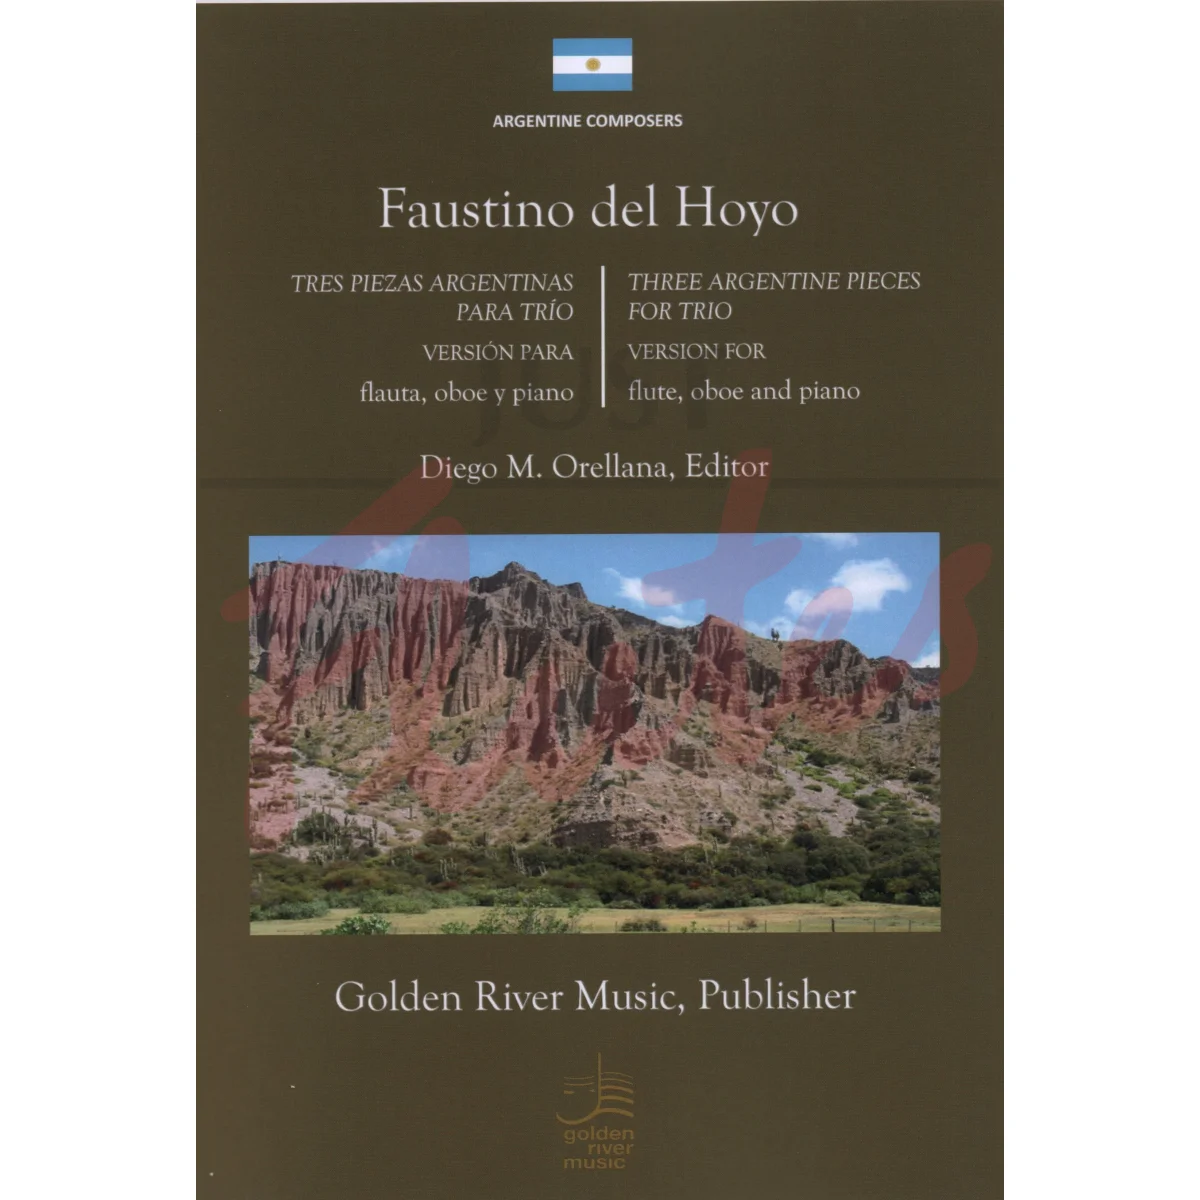 Three Argentine Pieces for Flute, Oboe and Piano